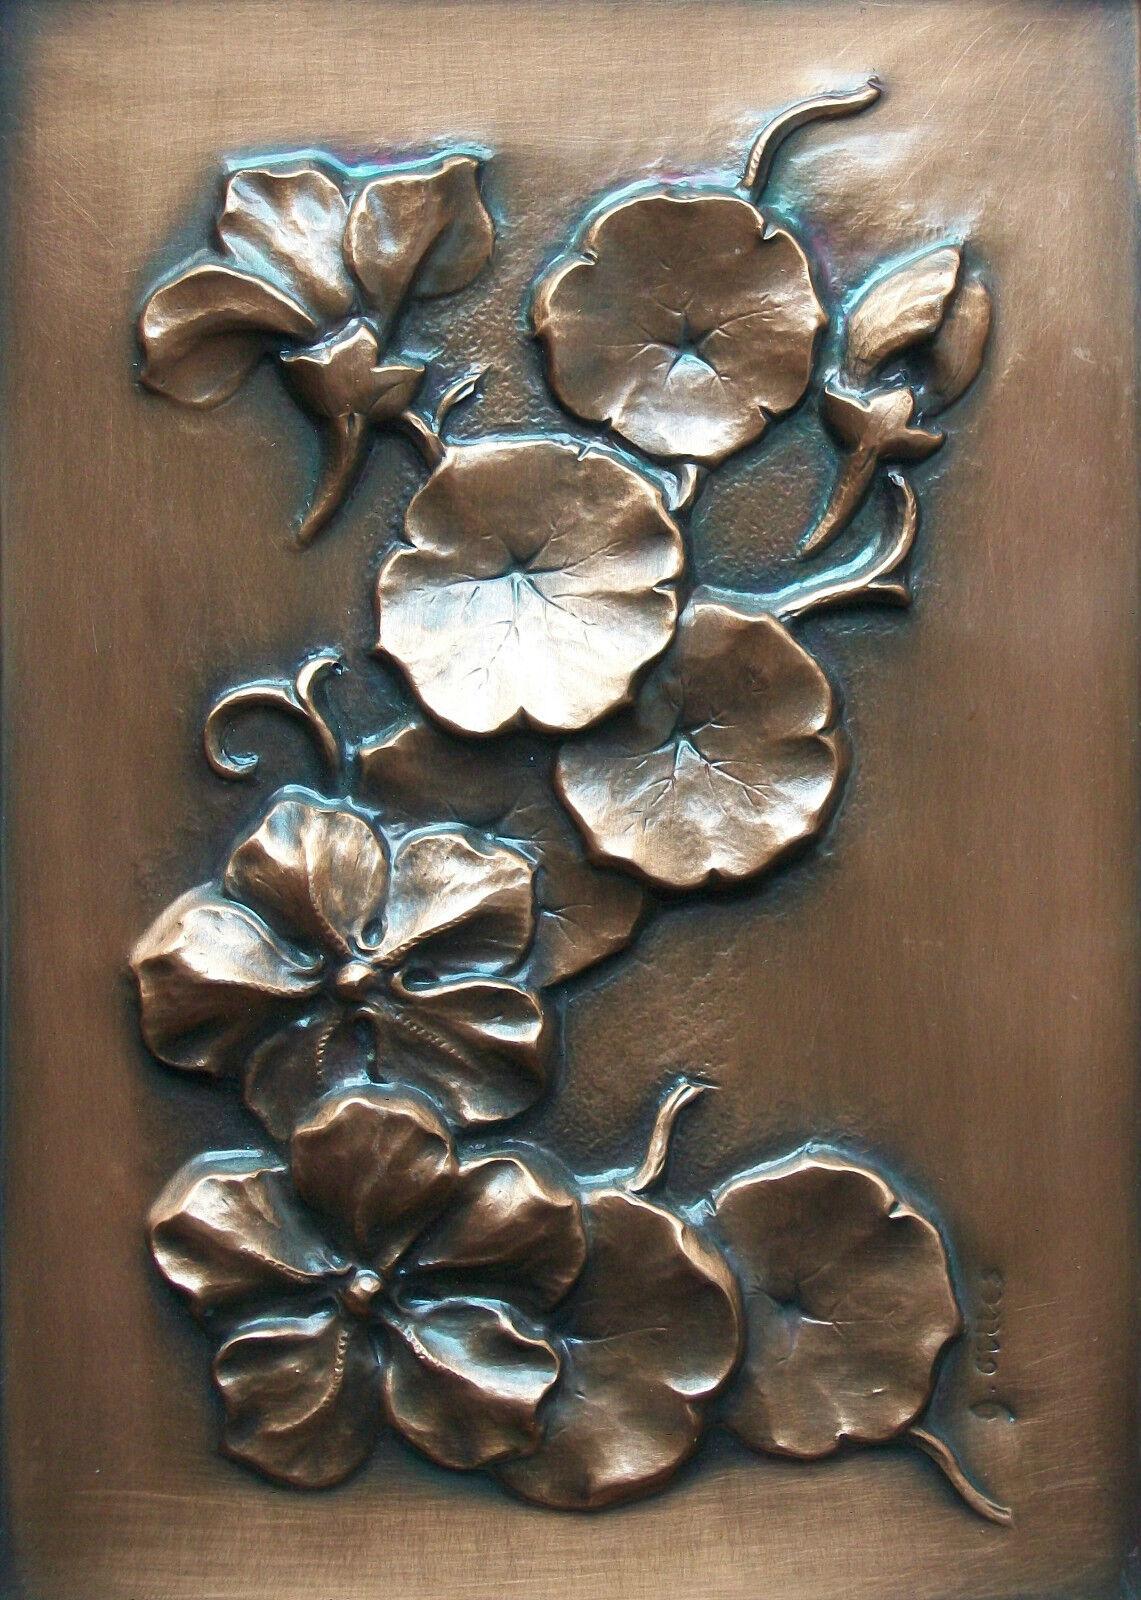 Canadian ALBERT GILLES - Copper Repoussé Panel - Signed - Canada - Late 20th Century For Sale